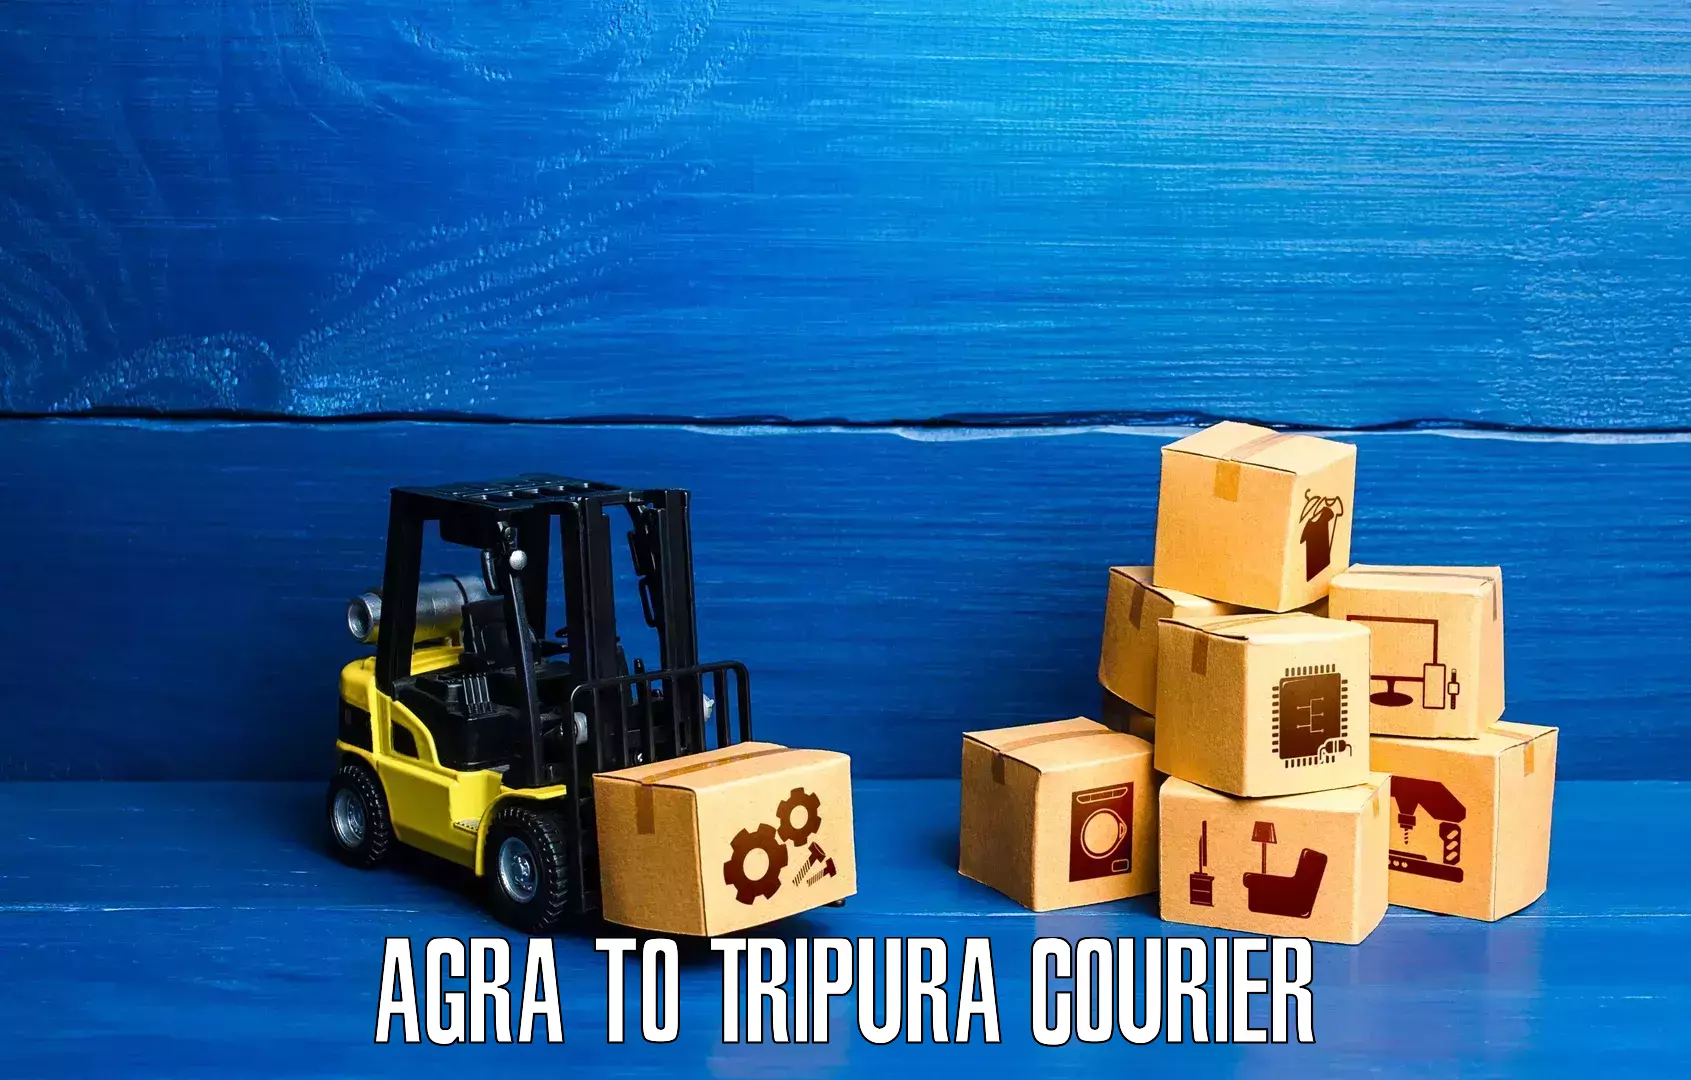 Advanced shipping technology in Agra to Tripura